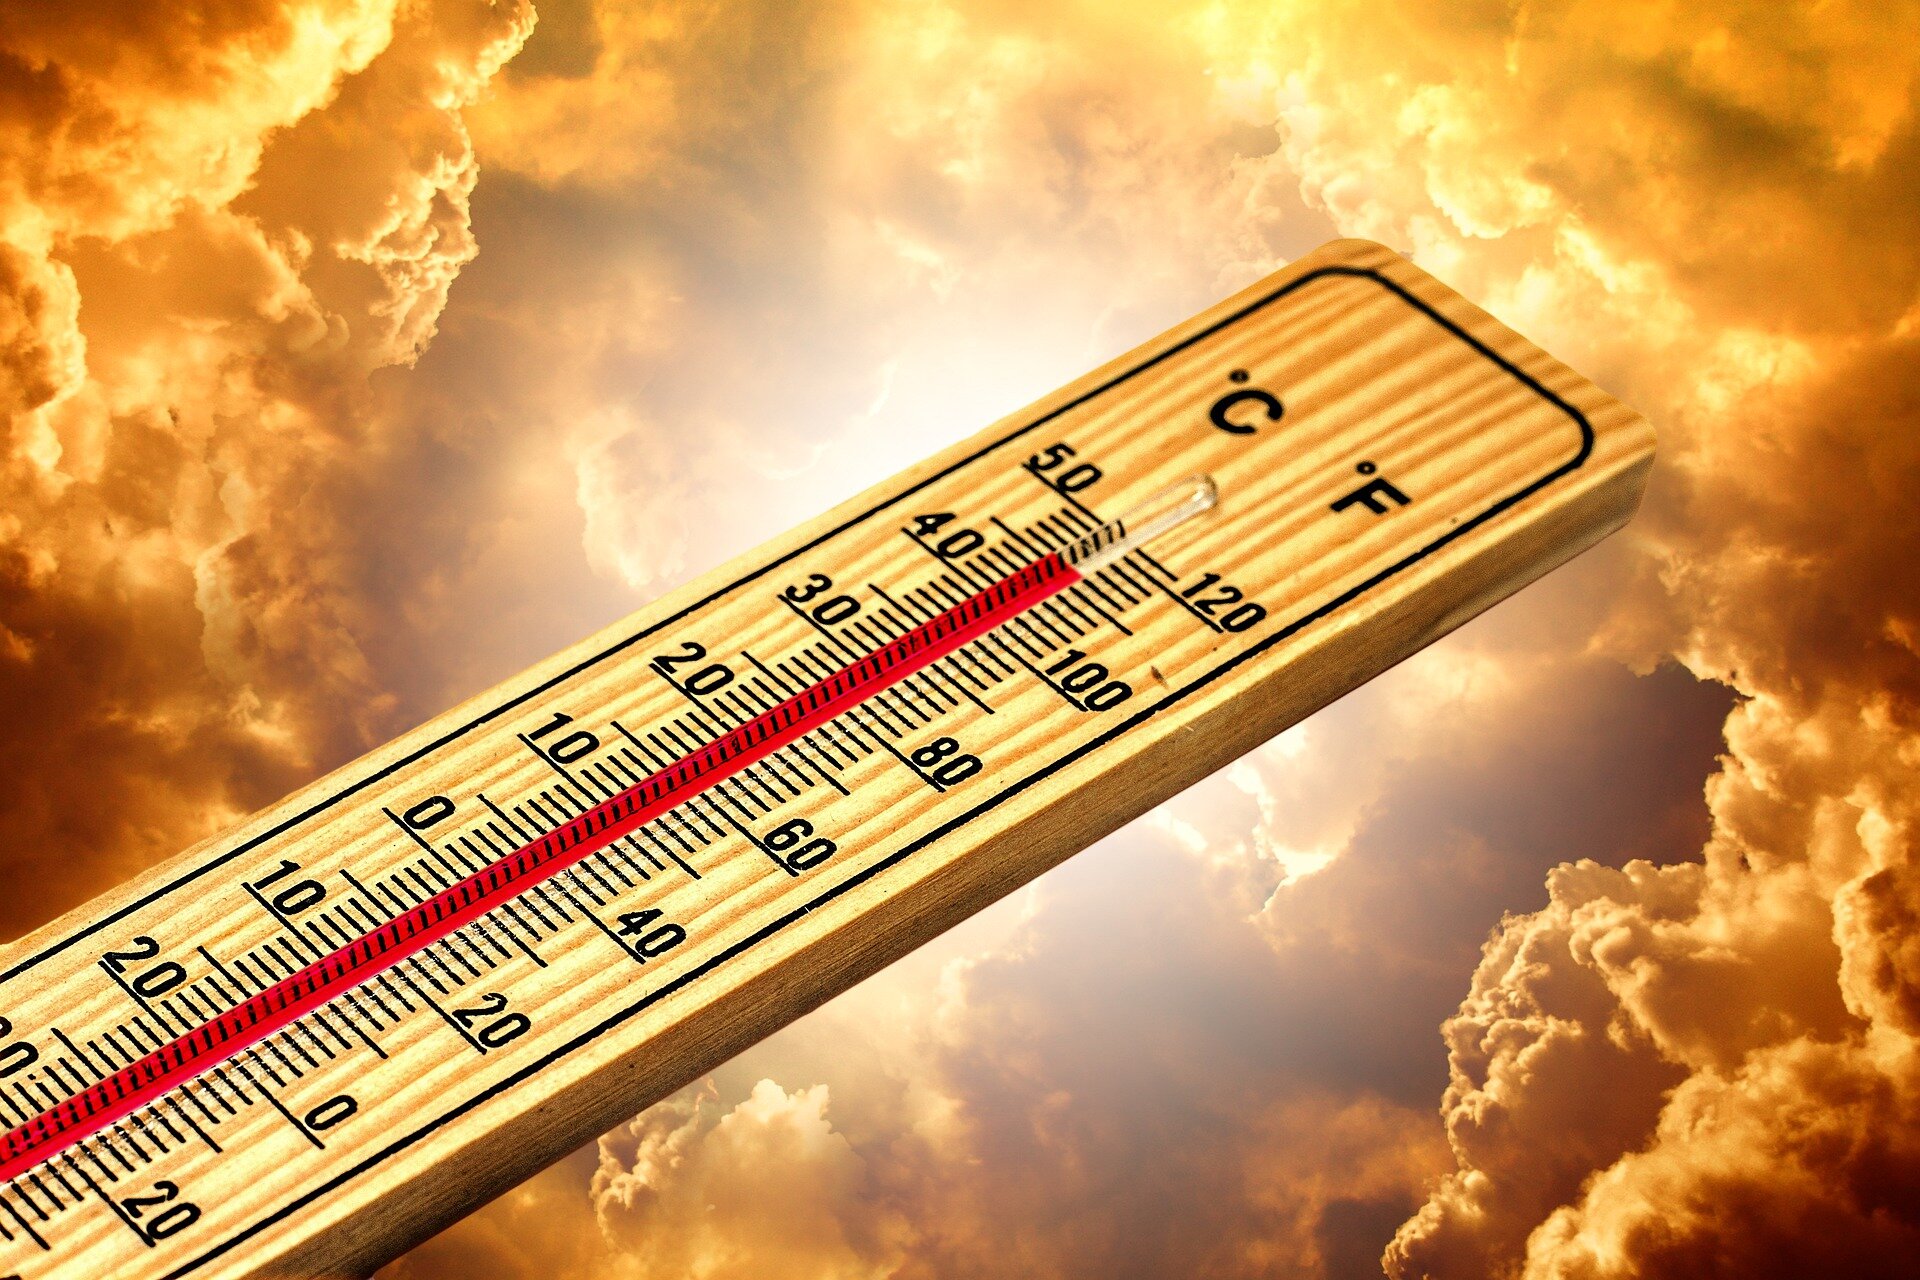 Kenya S Had Unusually Hot Weather—an Expert Unpacks What Could Be